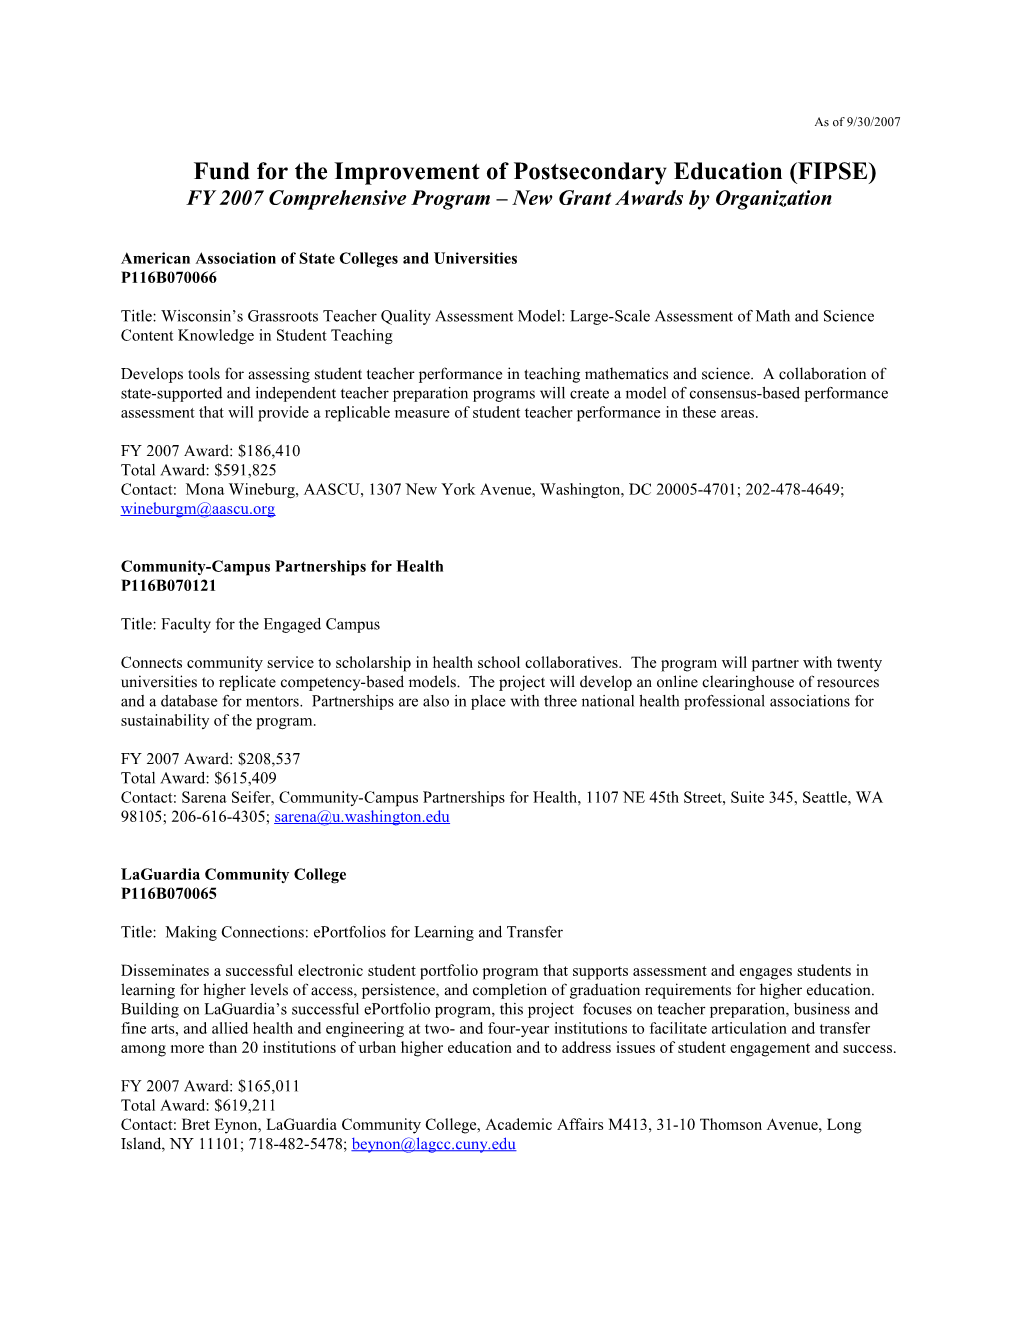 FY 2007 Abstracts for the FIPSE Comprehensive Program (MS Word)